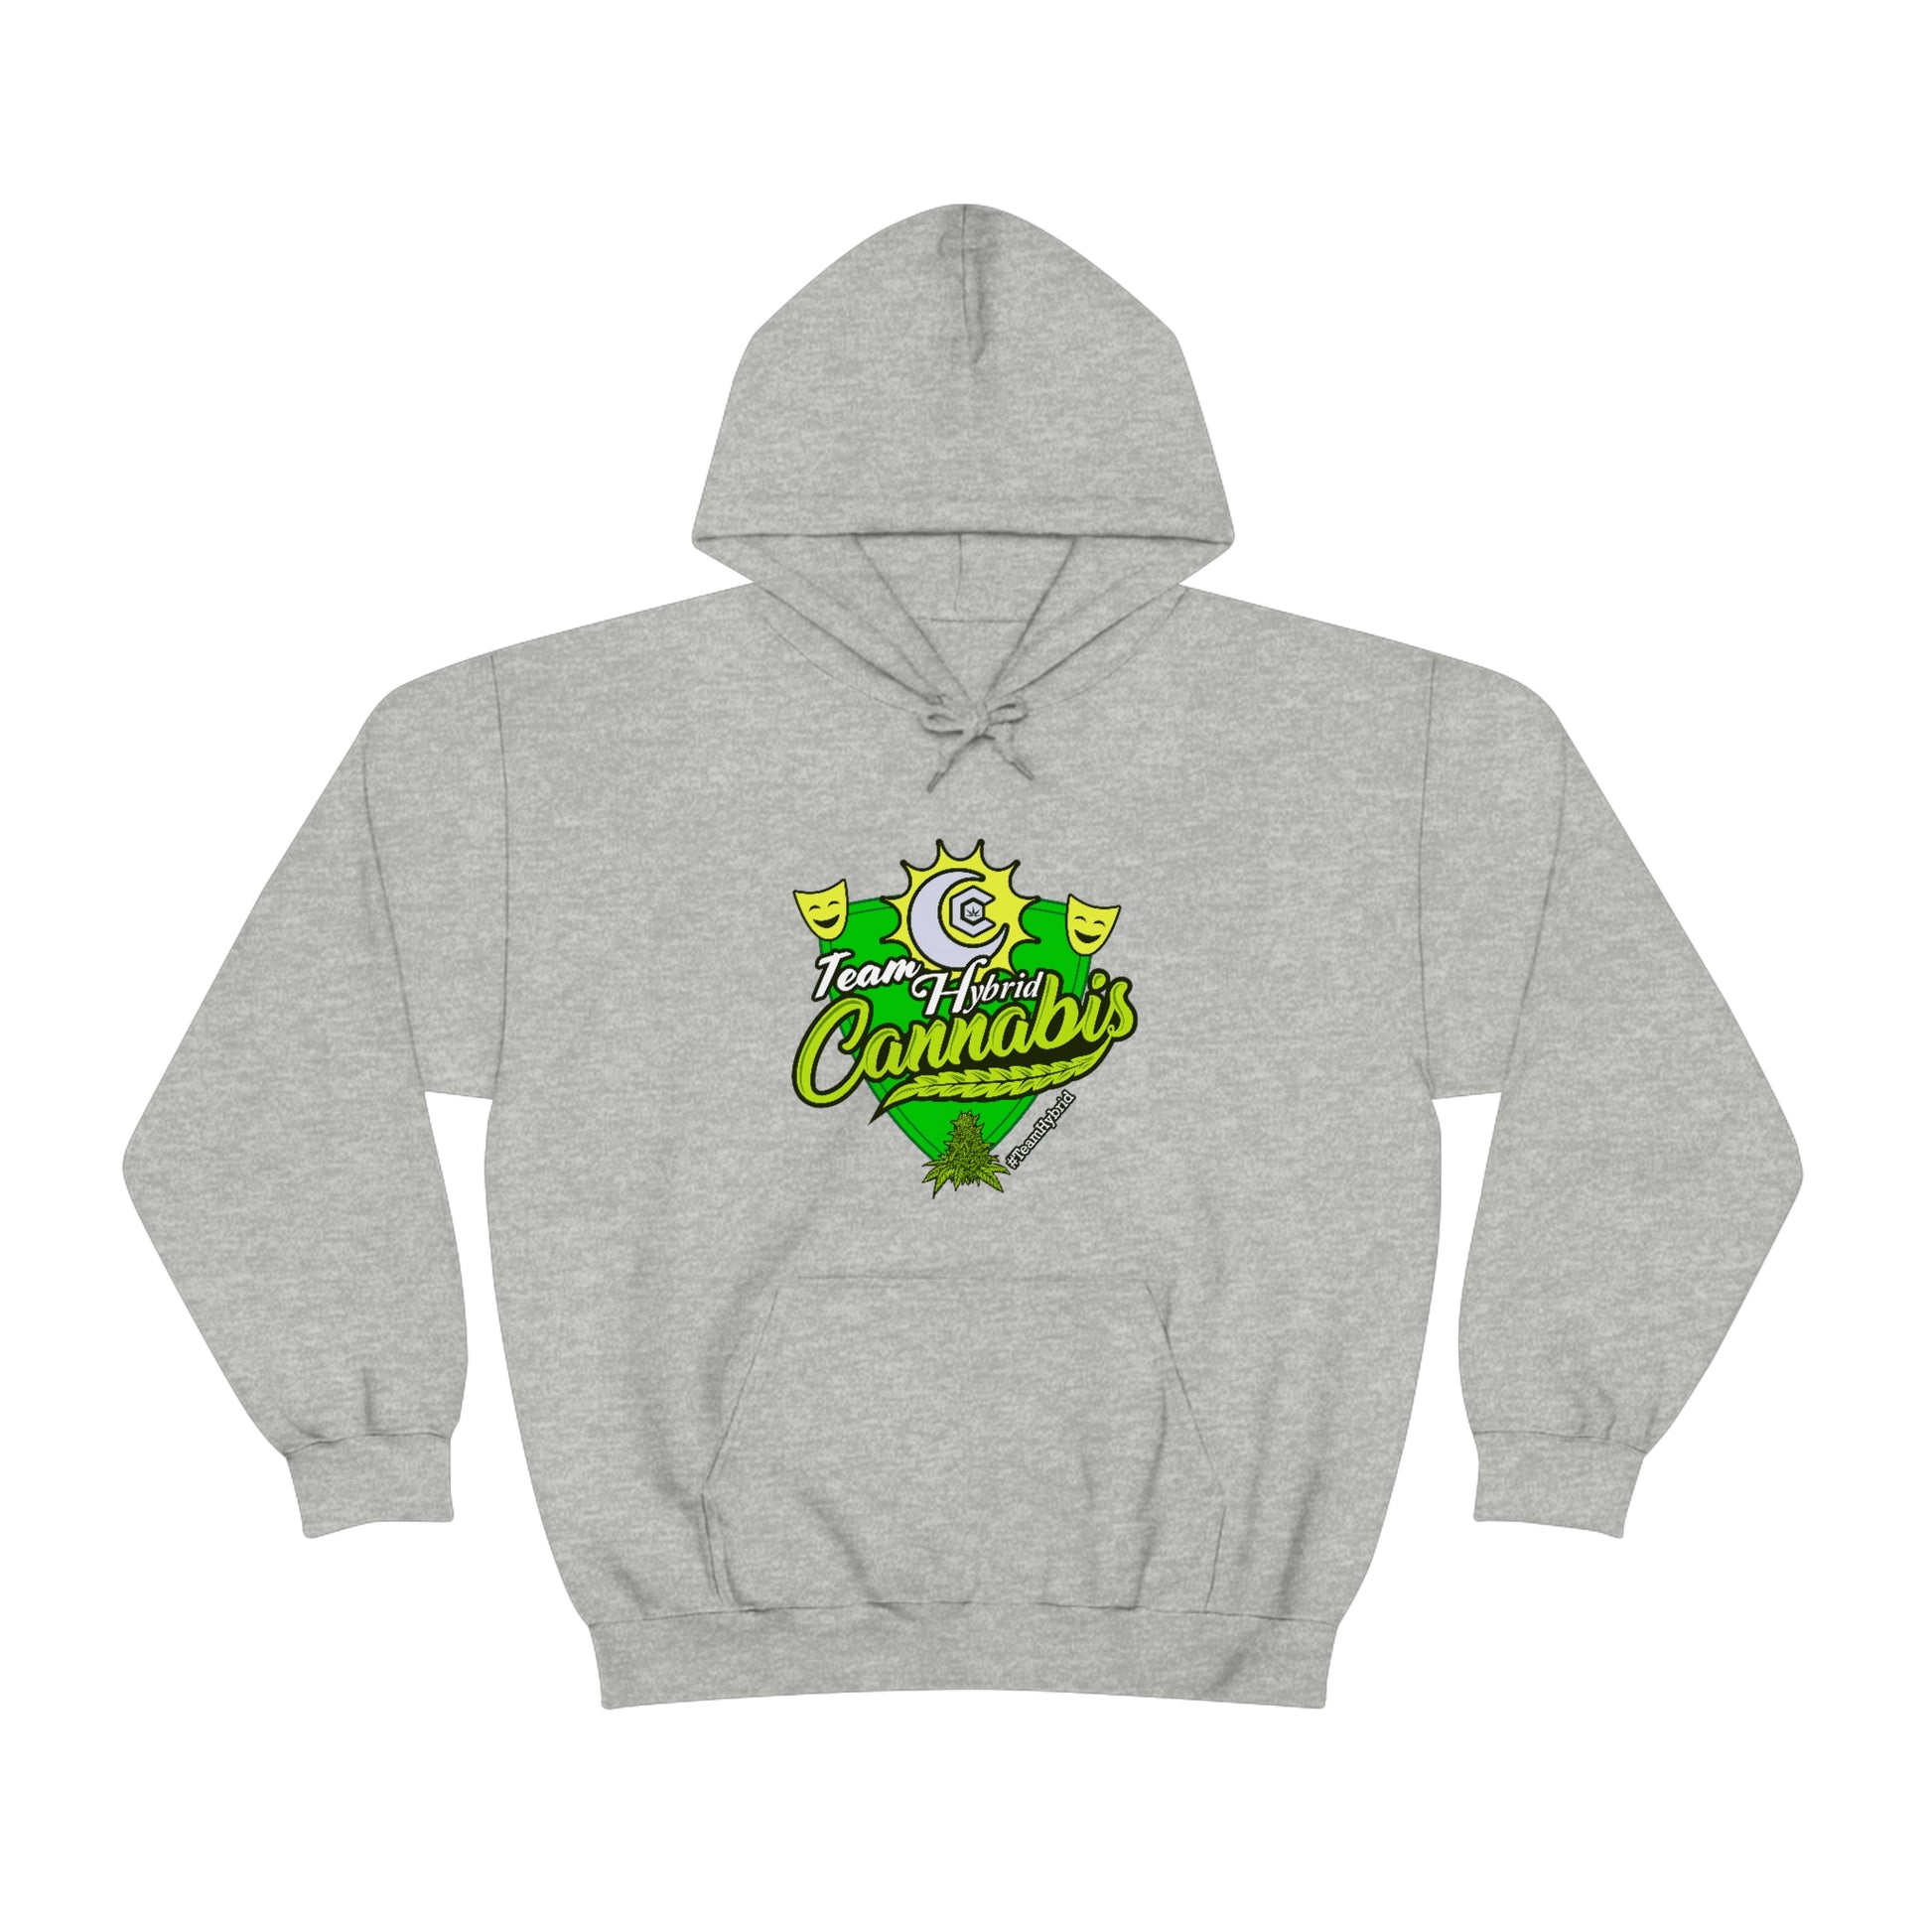 a Team Hybrid Cannabis Pullover Hoodie with a green and yellow logo on it.